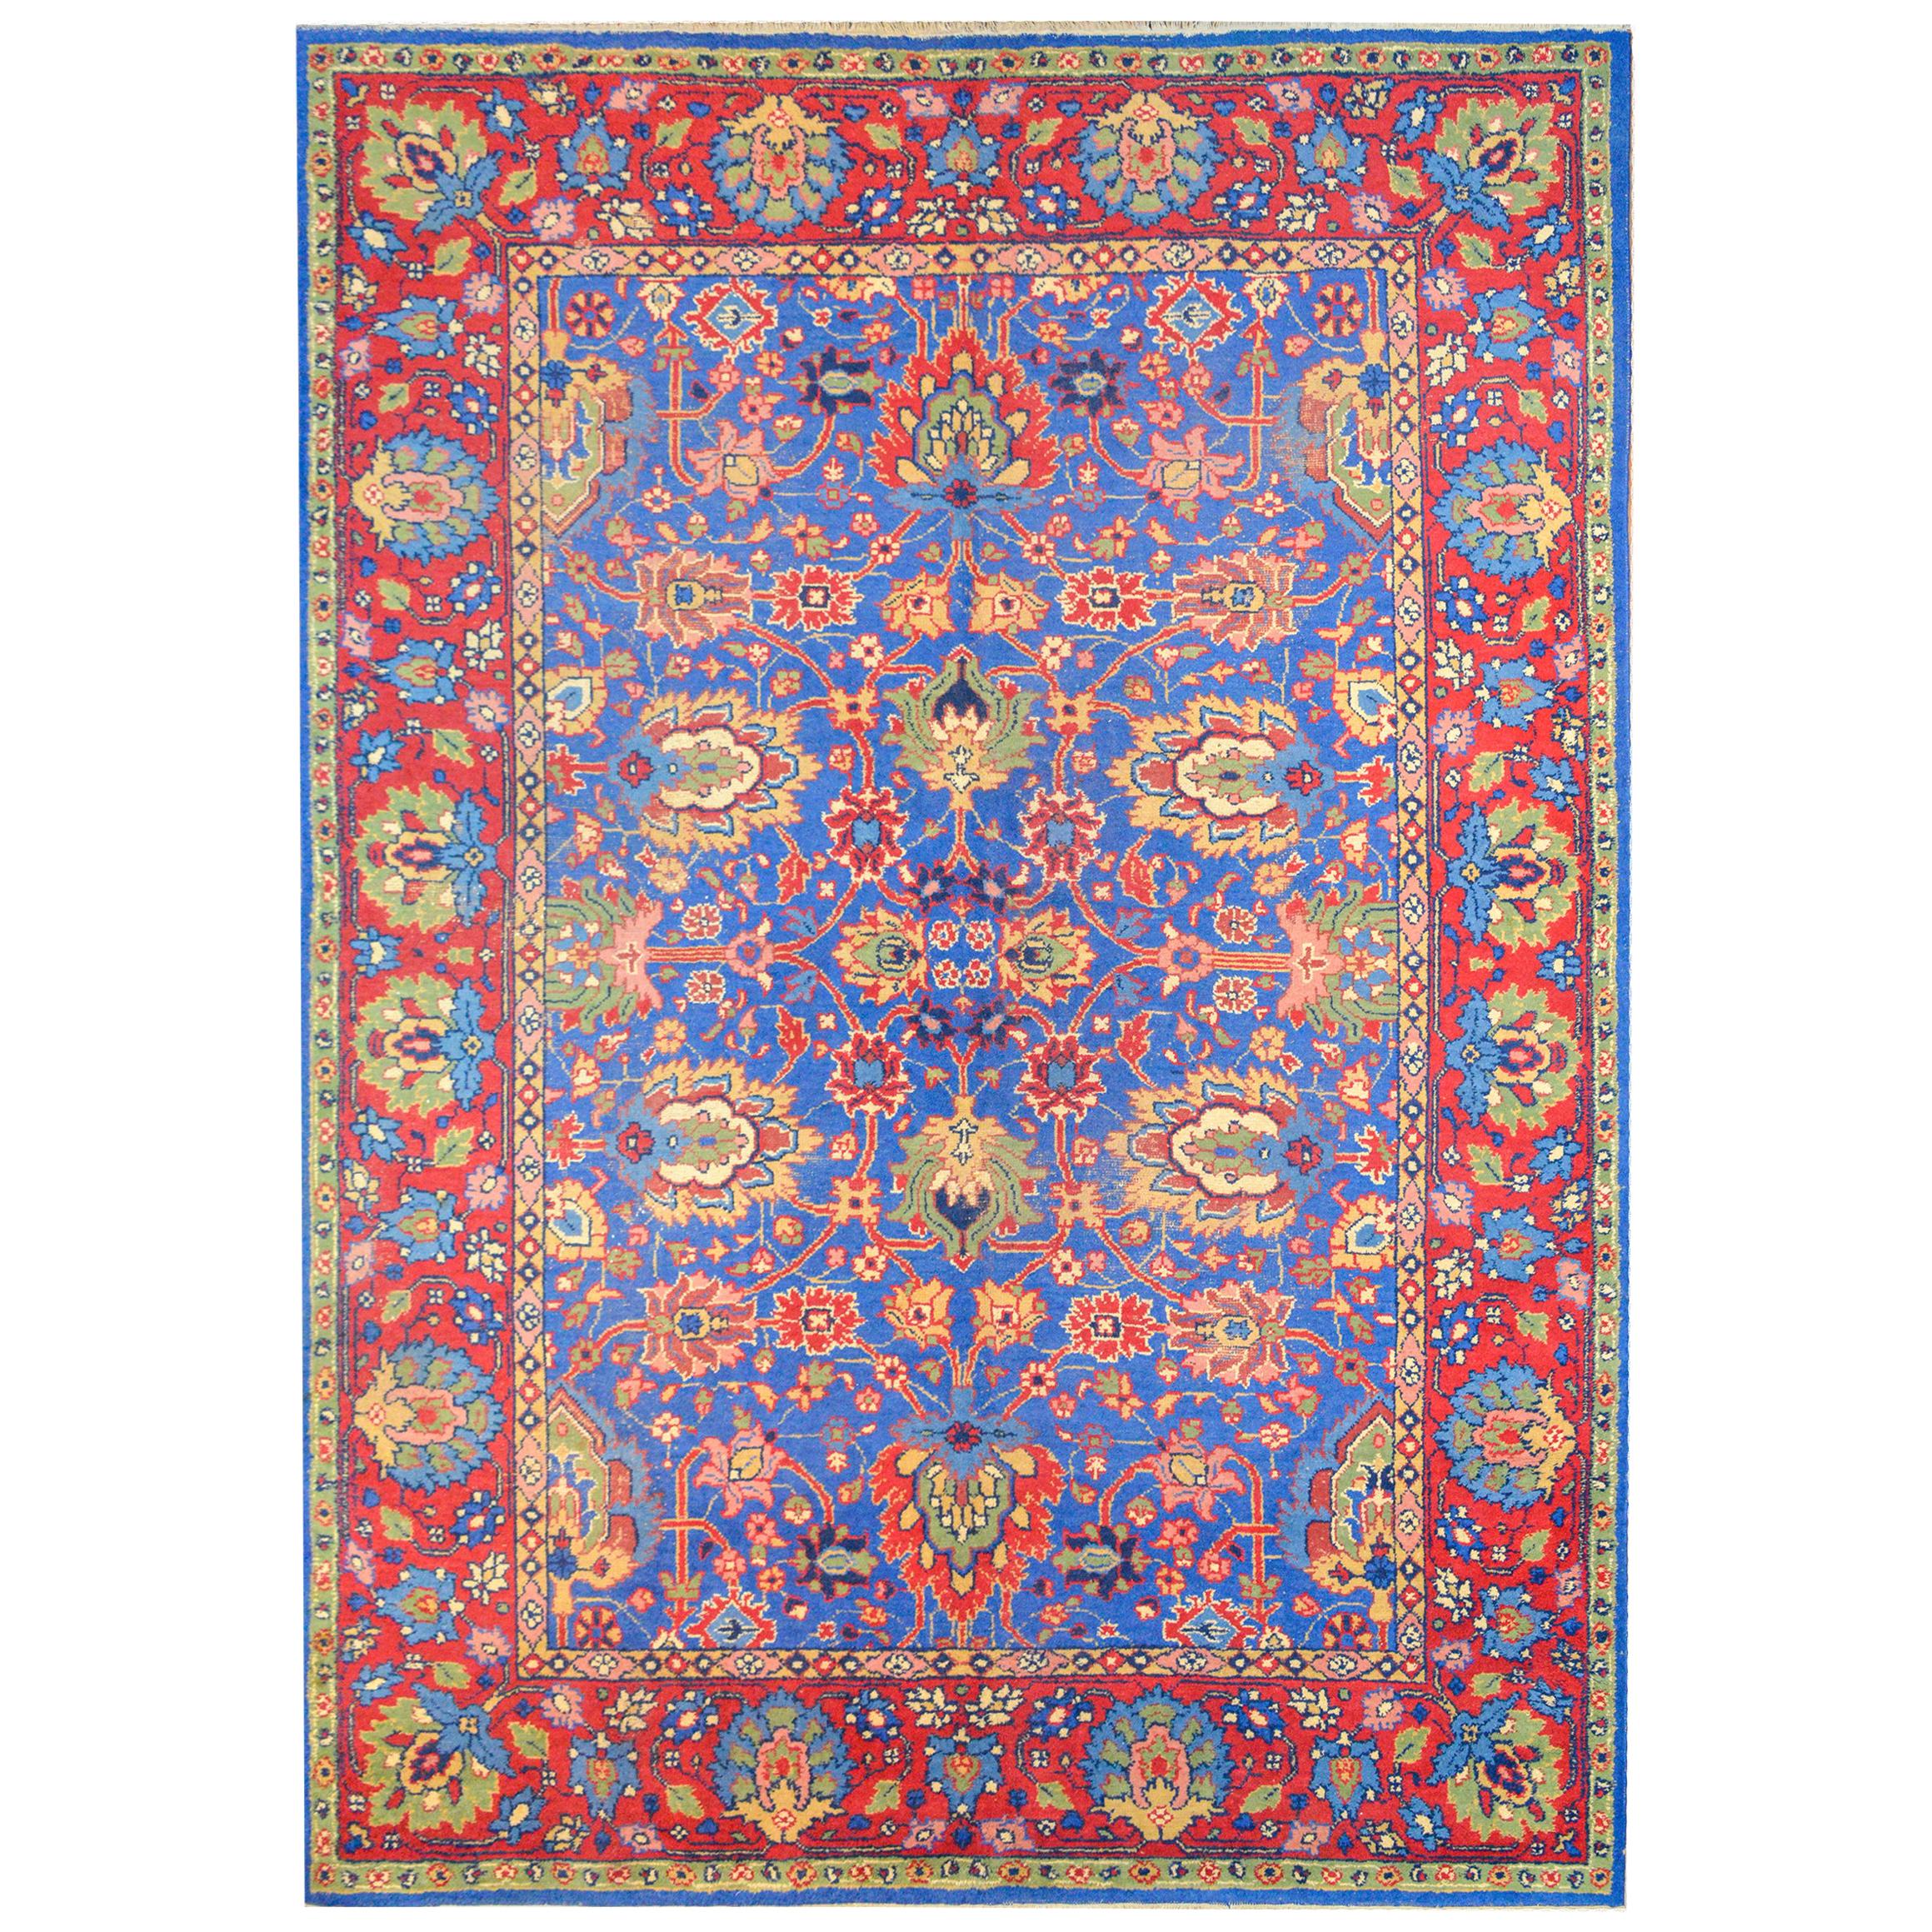 A bold vintage Persian mahal rug with an all-over large-scale floral and scrolling vine pattern woven in bright crimson, green, gold, cream, and indigo, against a light indigo background. The border is extraordinary with a wide central floral